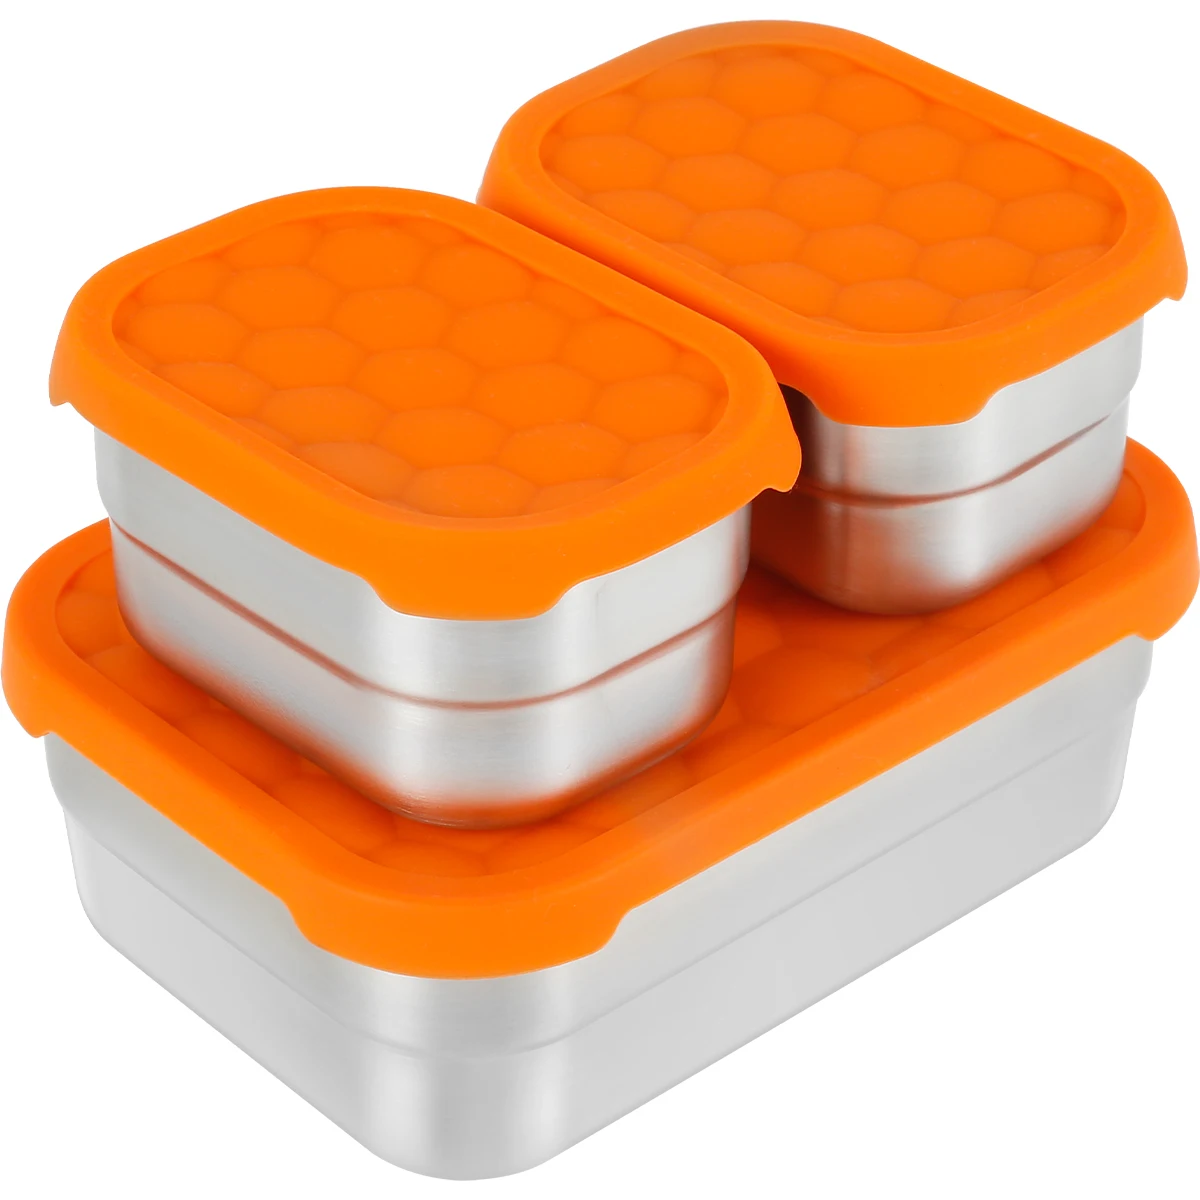 https://ae01.alicdn.com/kf/S37b40c95abe24cffacca7babc6cb5f5bb/3Pcs-Stainless-Steel-Bento-Lunch-Box-Food-Containers-Portable-Leakproof-Snack-Fruit-Storage-Box-for-Kids.jpg